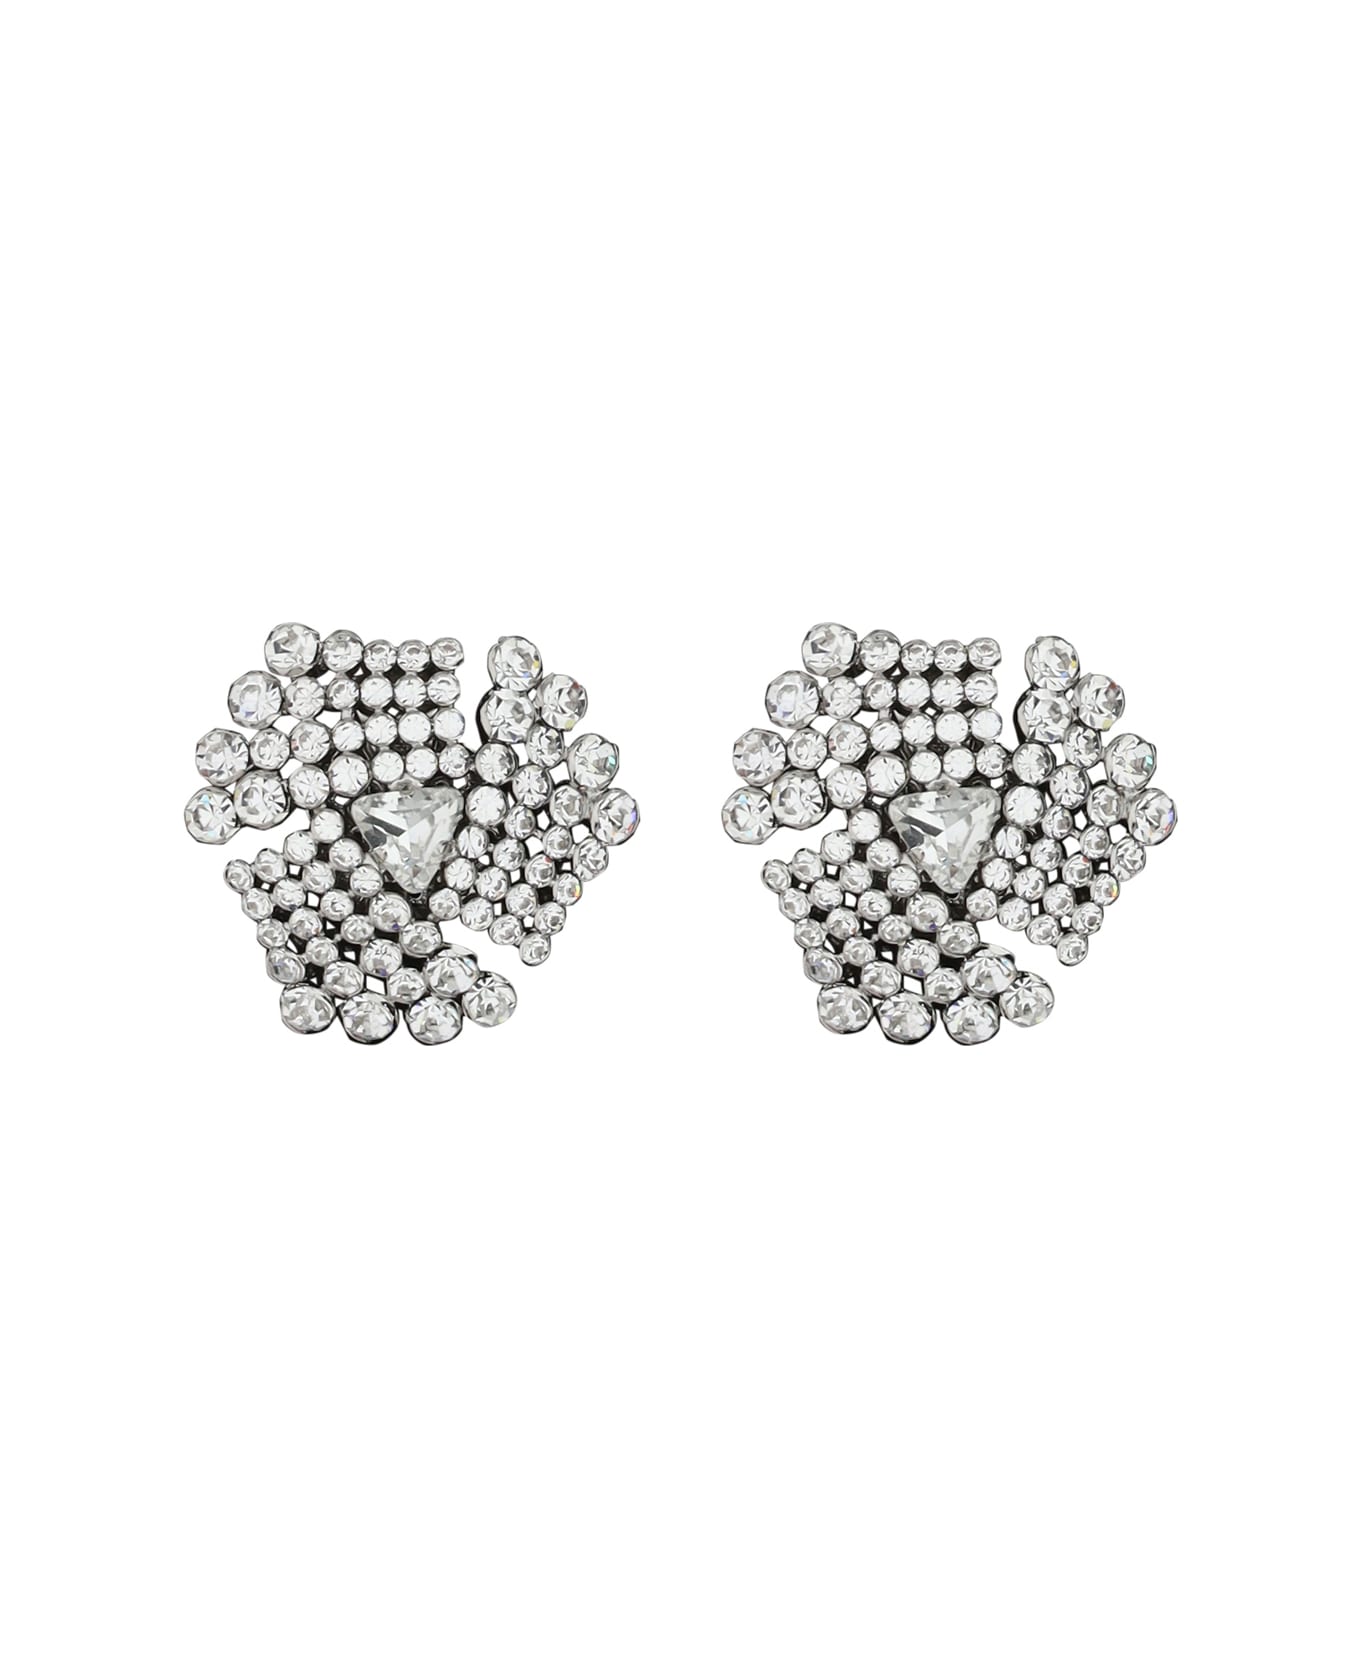 Alessandra Rich Crystal Earrings - Cry-silver